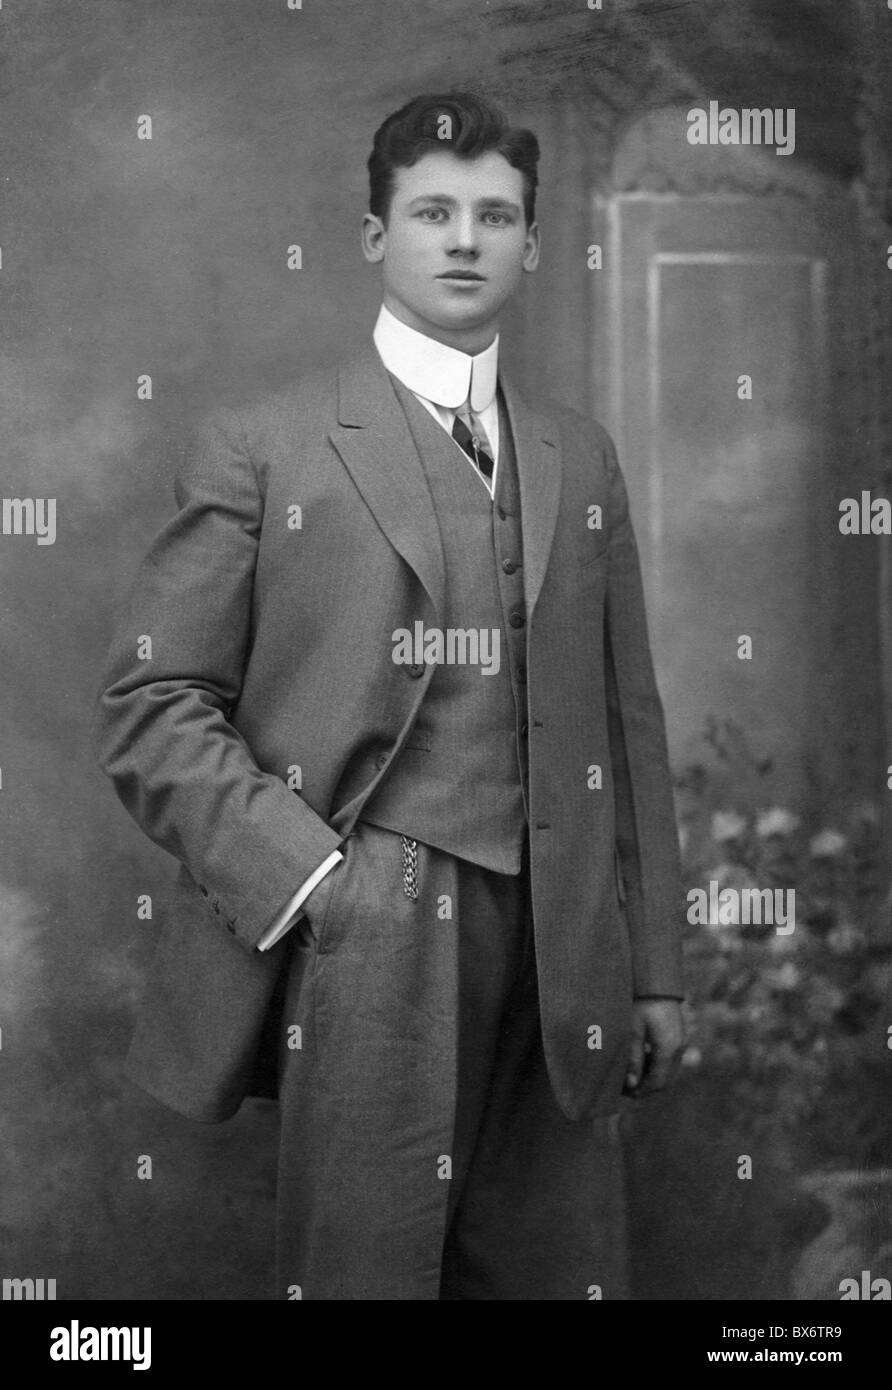 people, men, portrait / half length 1900 - 1930, young man in suit, New  York, circa 1910, 20th century, 1910s, USA, United States of America,  standing, clothes, outfit, outfits, fashion, suit, suits,